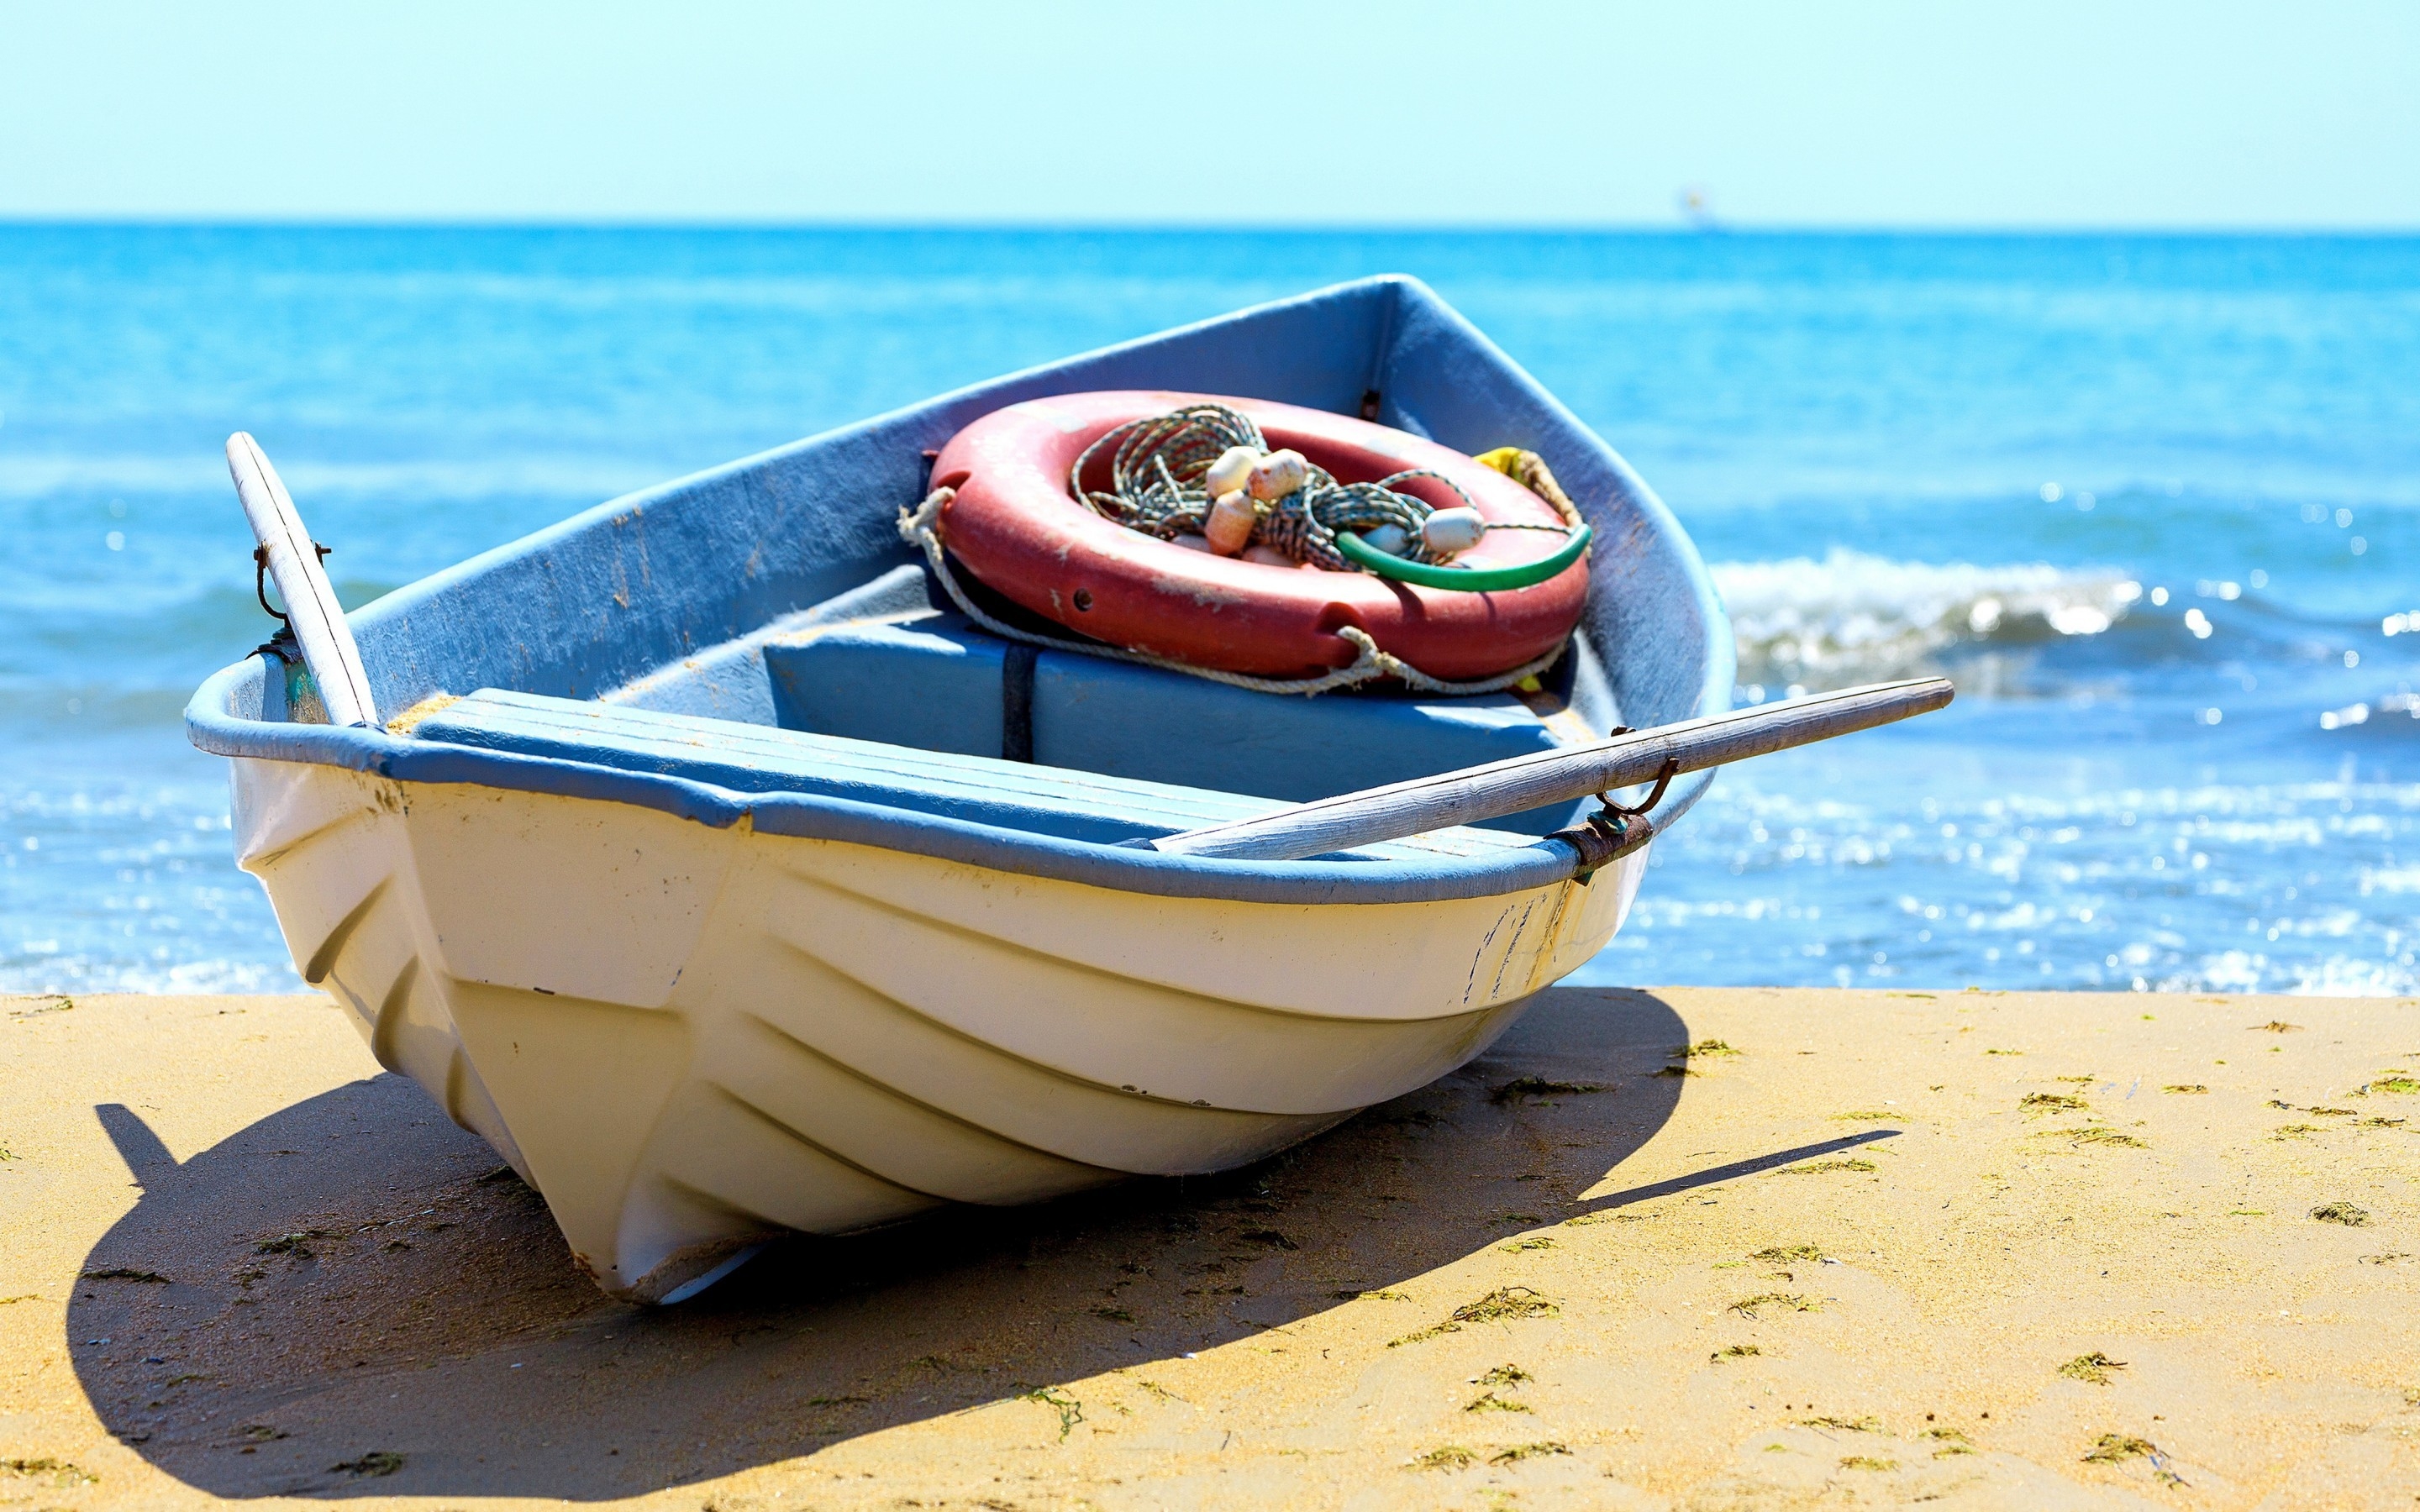 Old Boat on the Beach for 2880 x 1800 Retina Display resolution